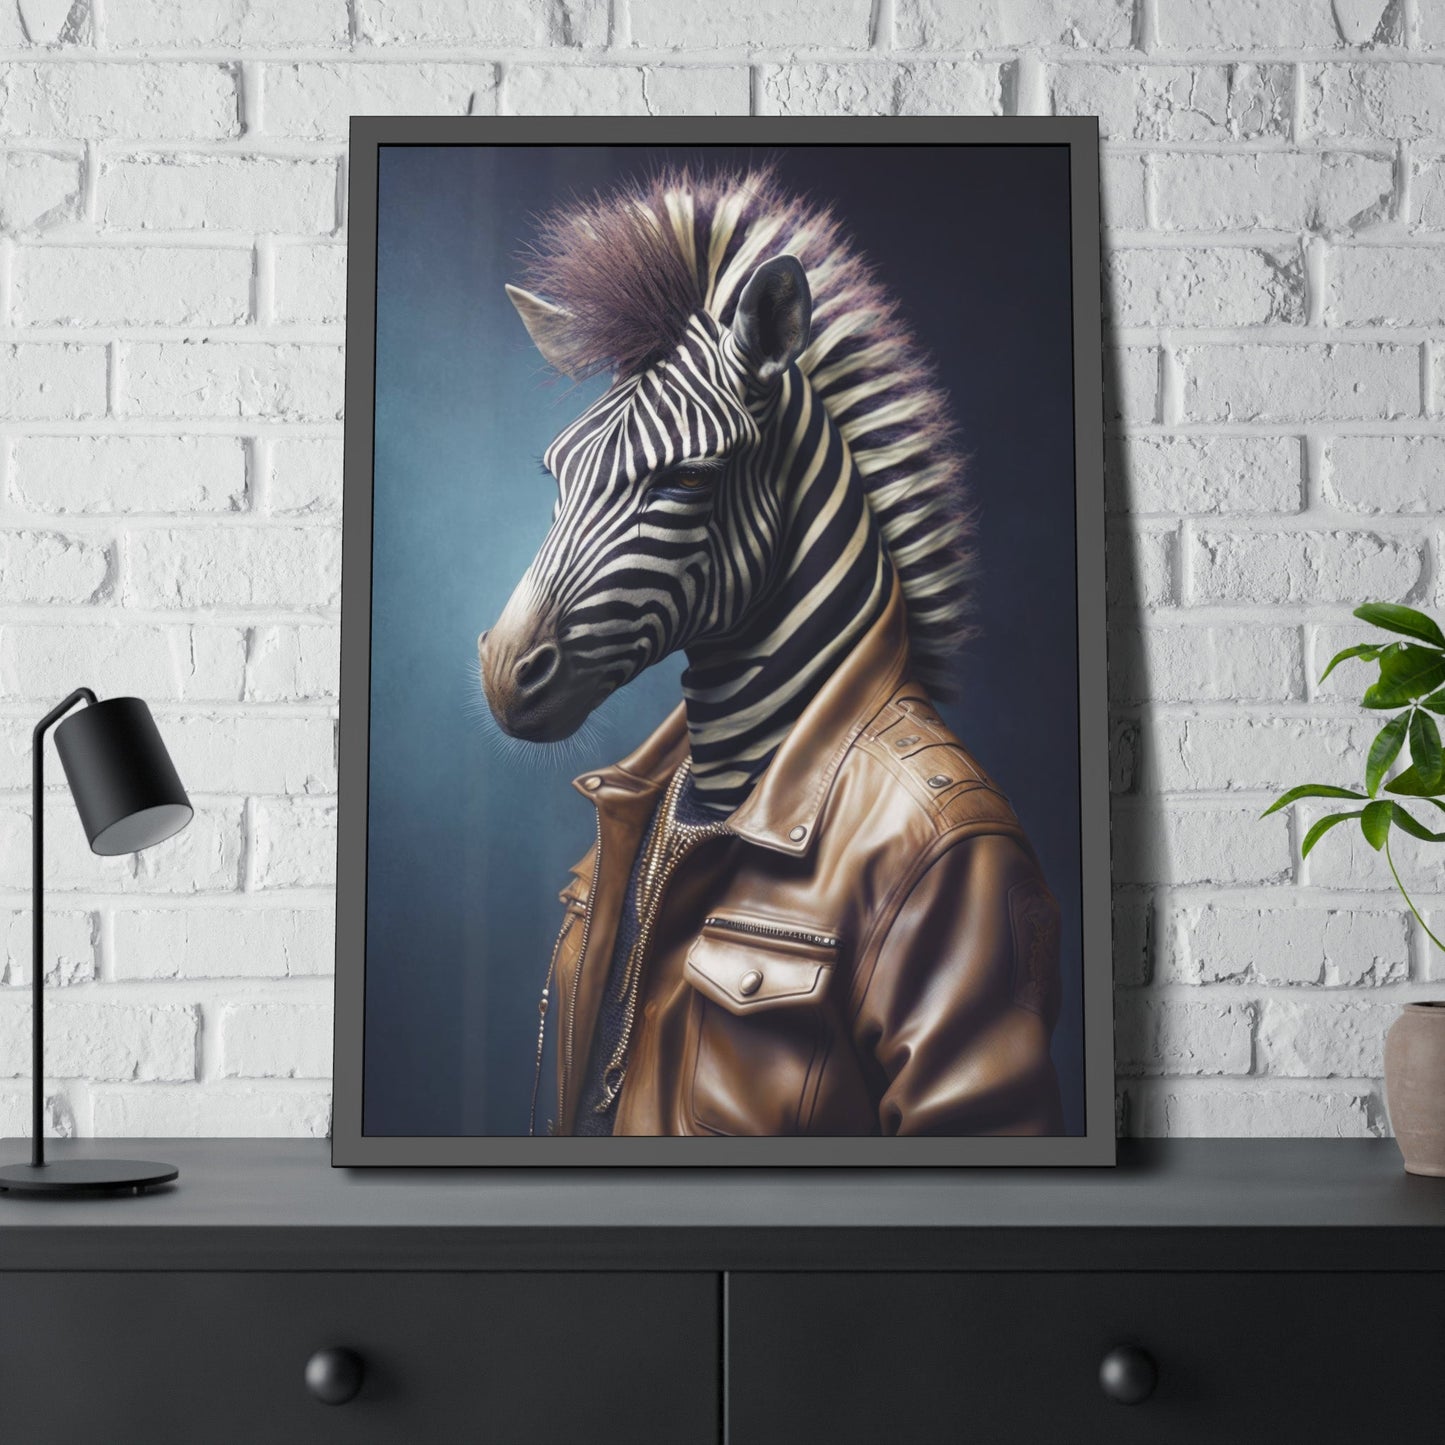 African Dreams: Wall Art Depicting the Grace and Strength of a Zebra